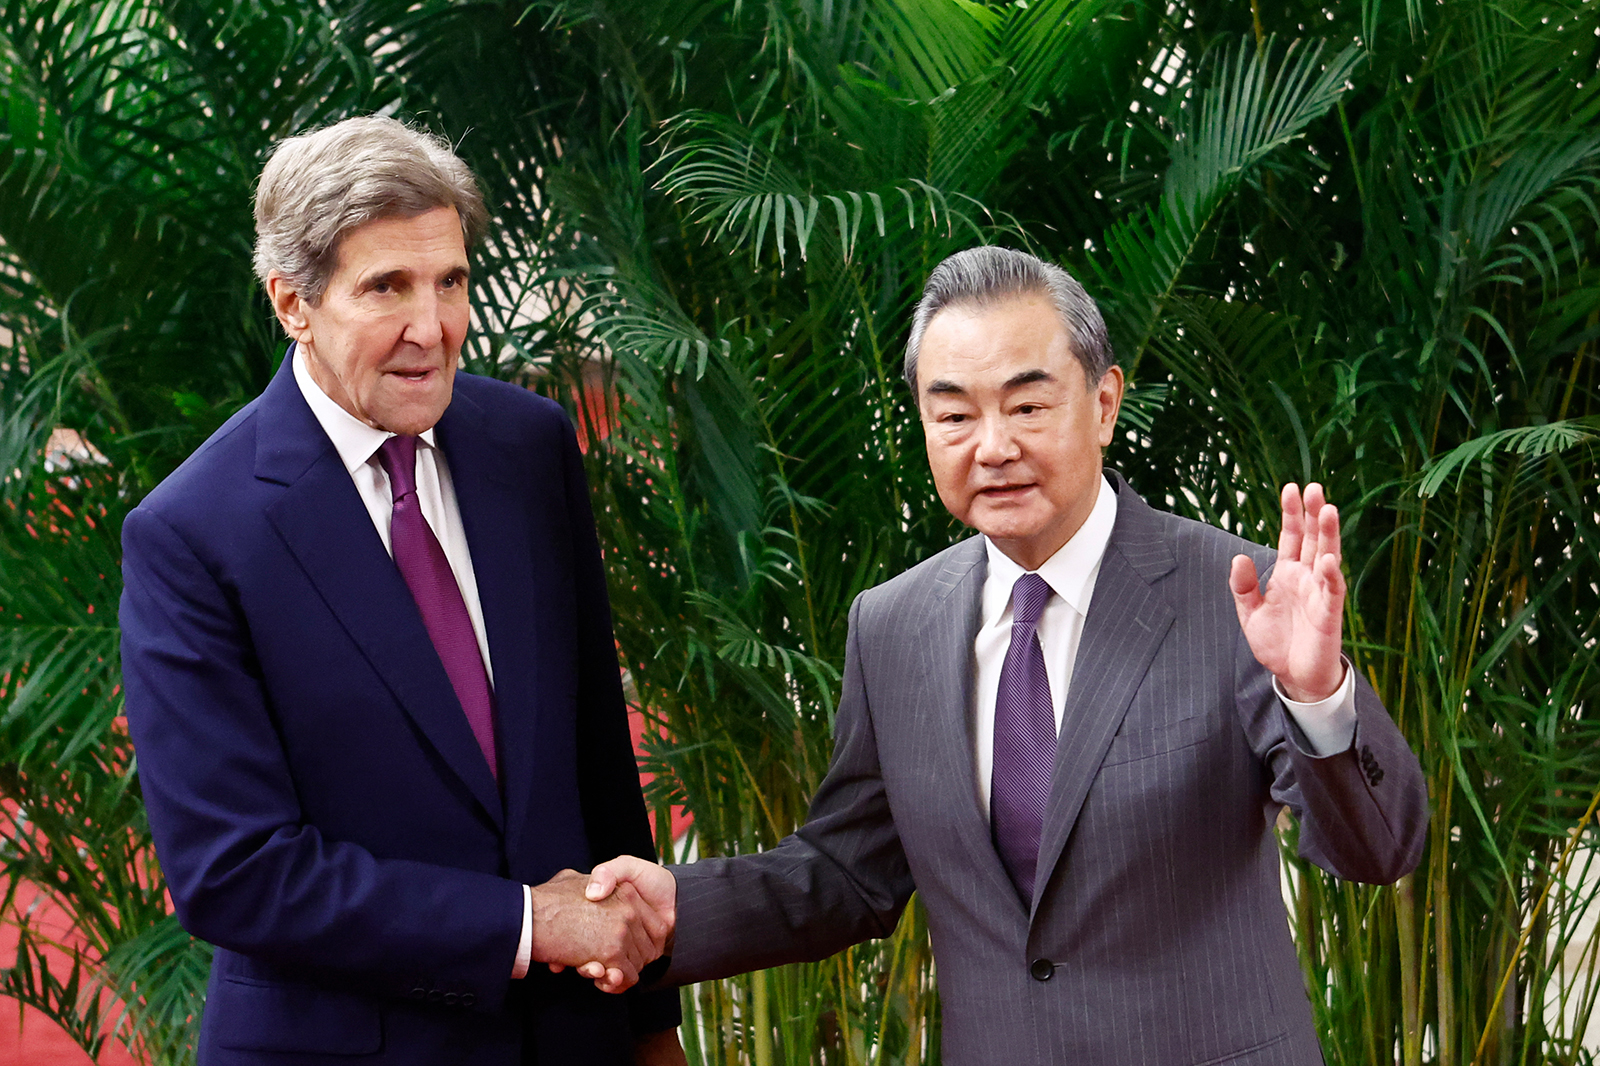 John Kerry is greeted by Wang Yi before a meeting in Beijing on July 18.